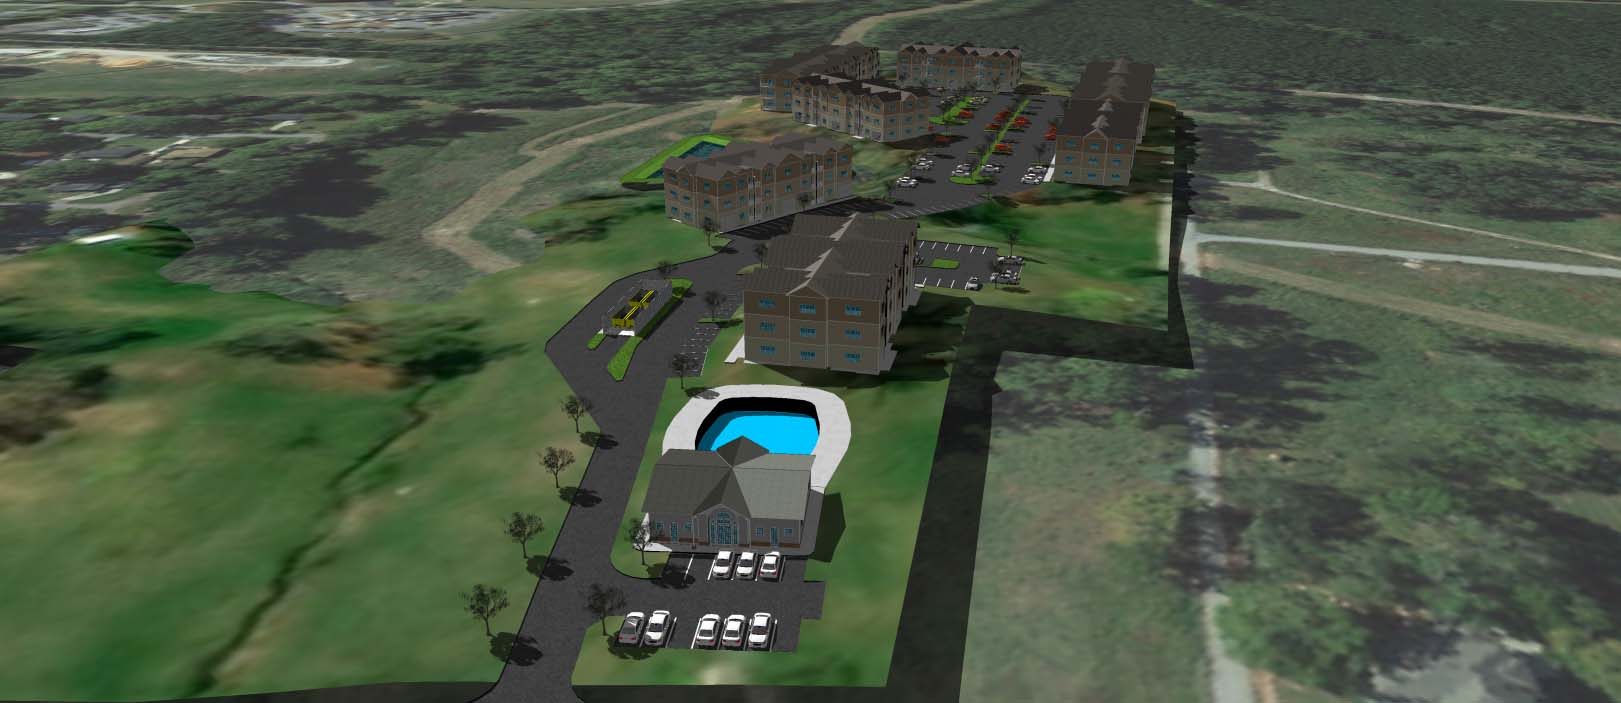 Click to enlarge - Greenwood Genetic Center Partnership Campus Multi-family